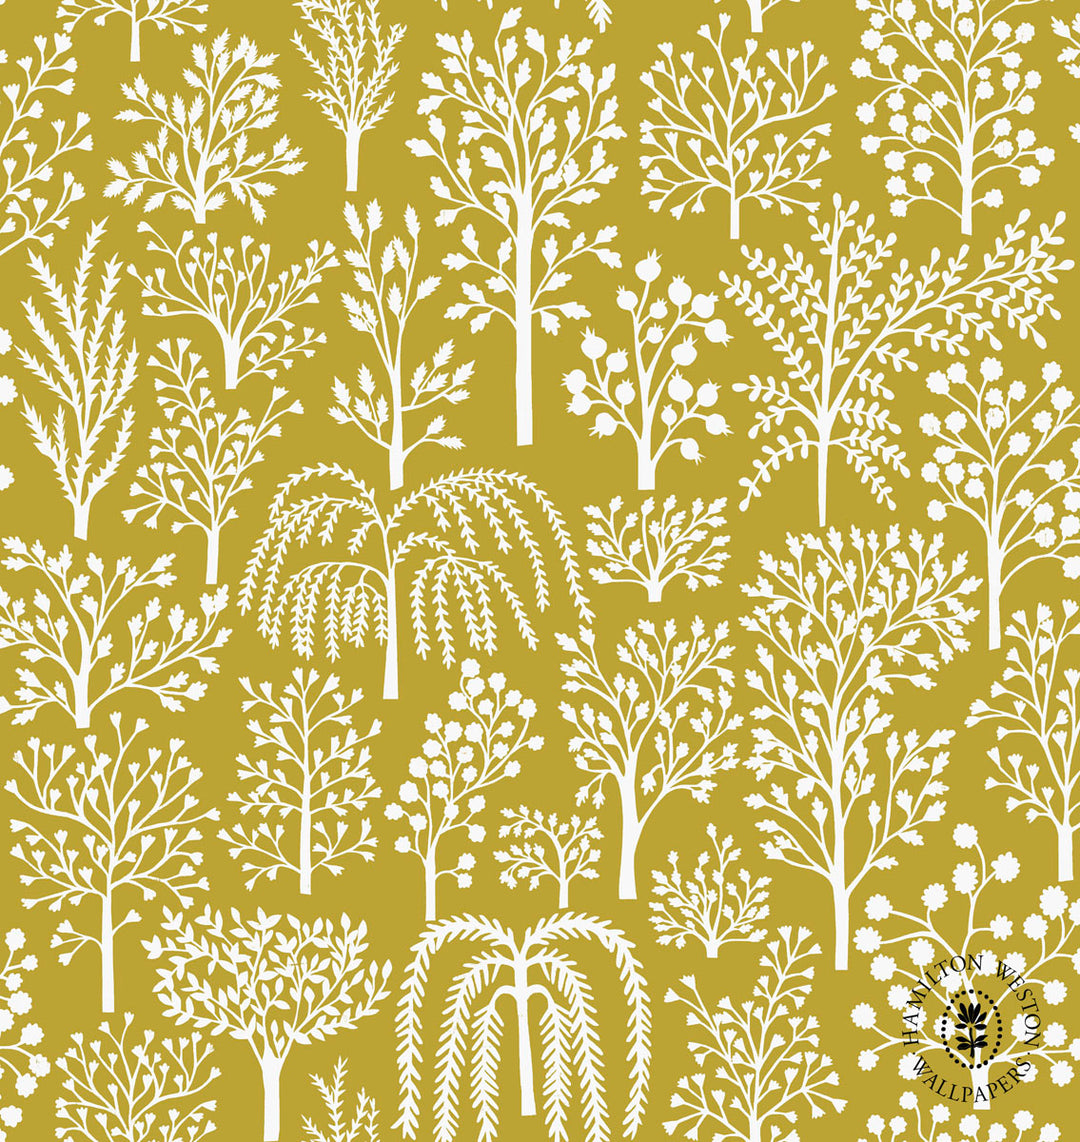 Hamilton-weston-wallpaper-Alice-Pattullo-Arboretum-hand-paper-cutting-Honeycomb-APARB06-traditional-stlye-pattern-country-trees